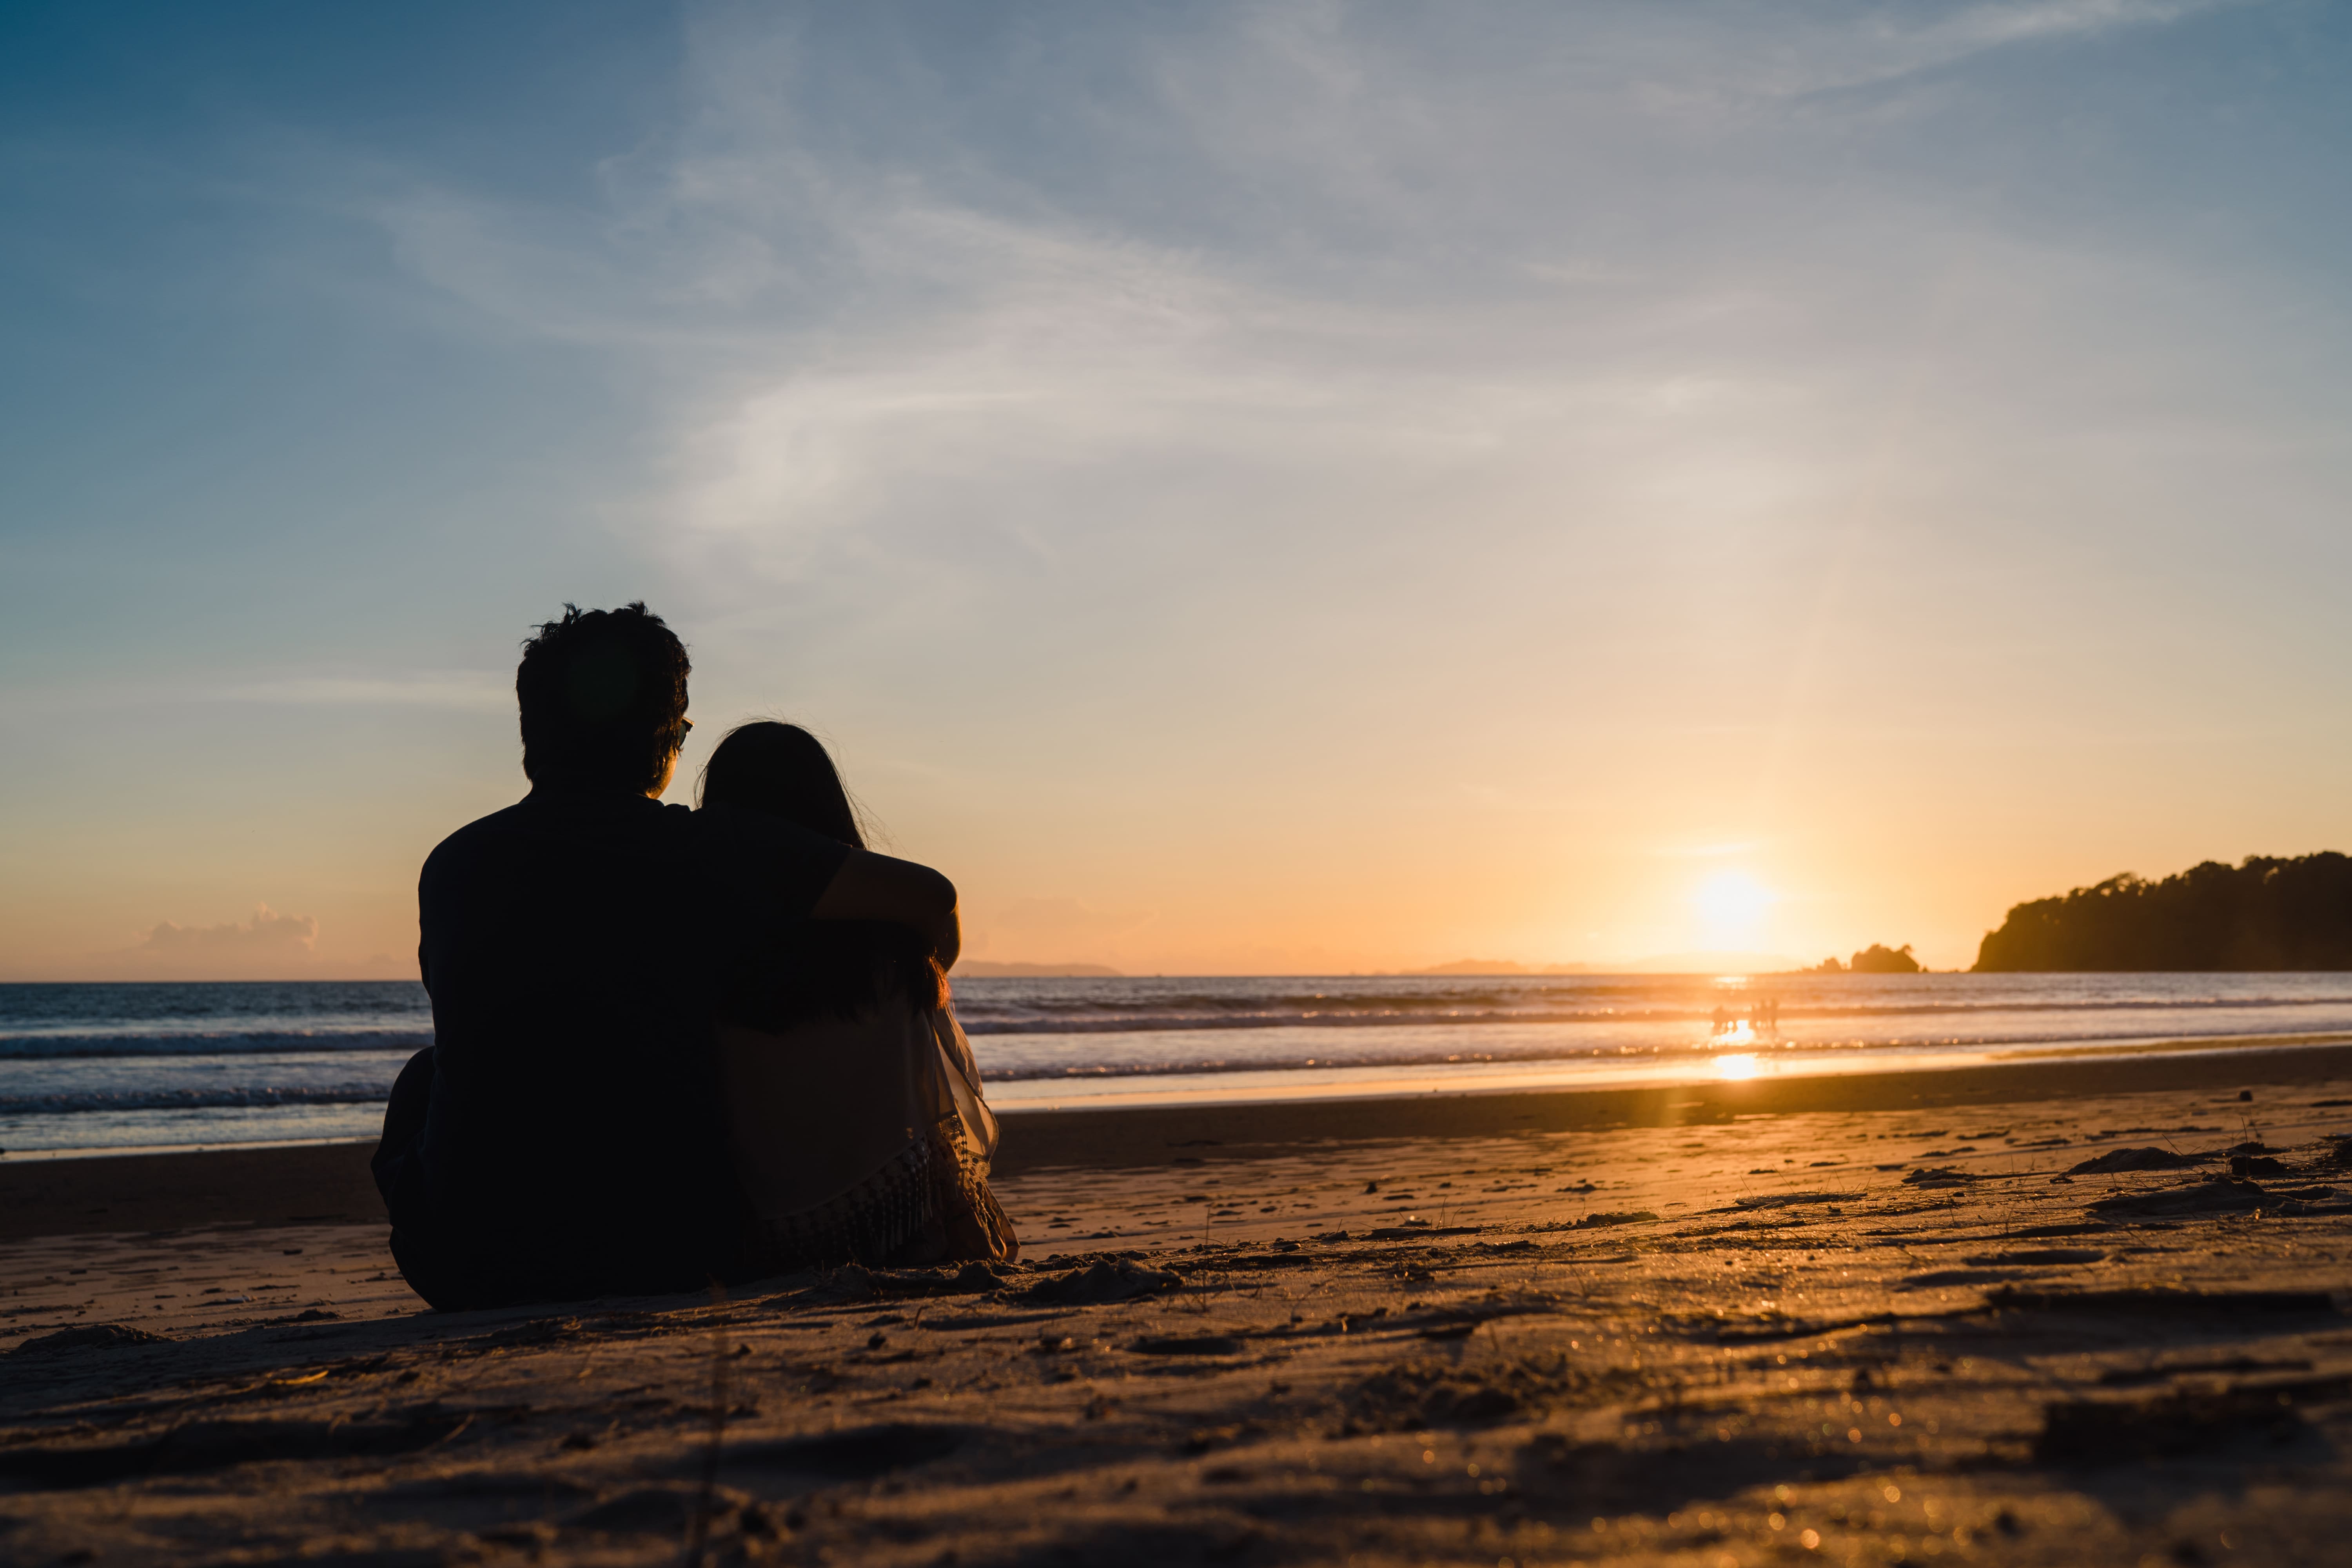 Two people sitting closely together on a beach, enjoying a tranquil sunset over the ocean.